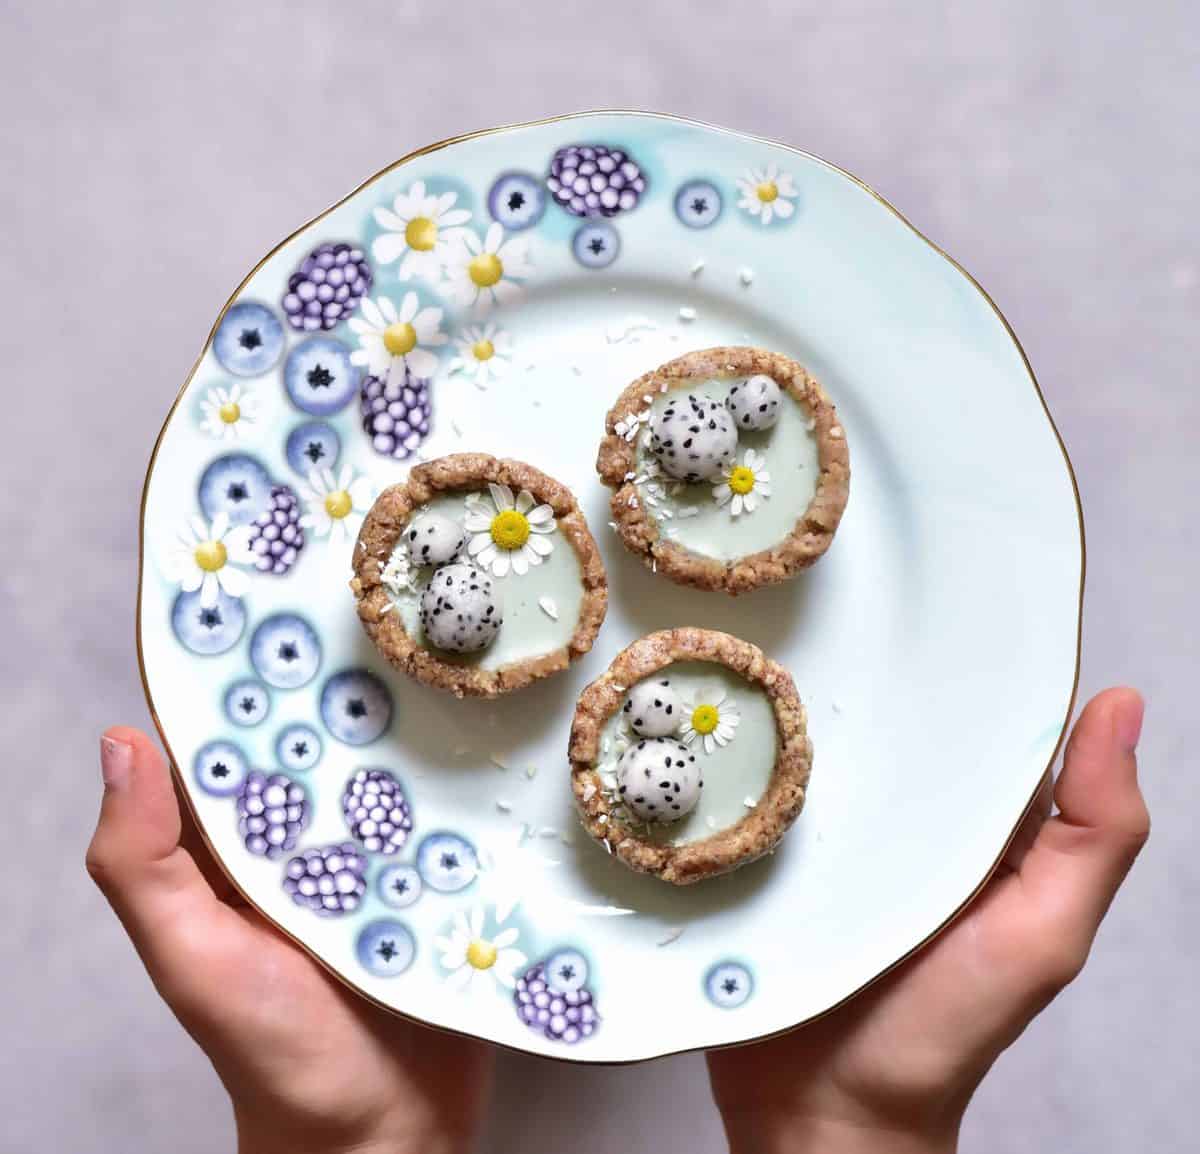 Mini green tarts with dragonfruit balls and daisy flowers